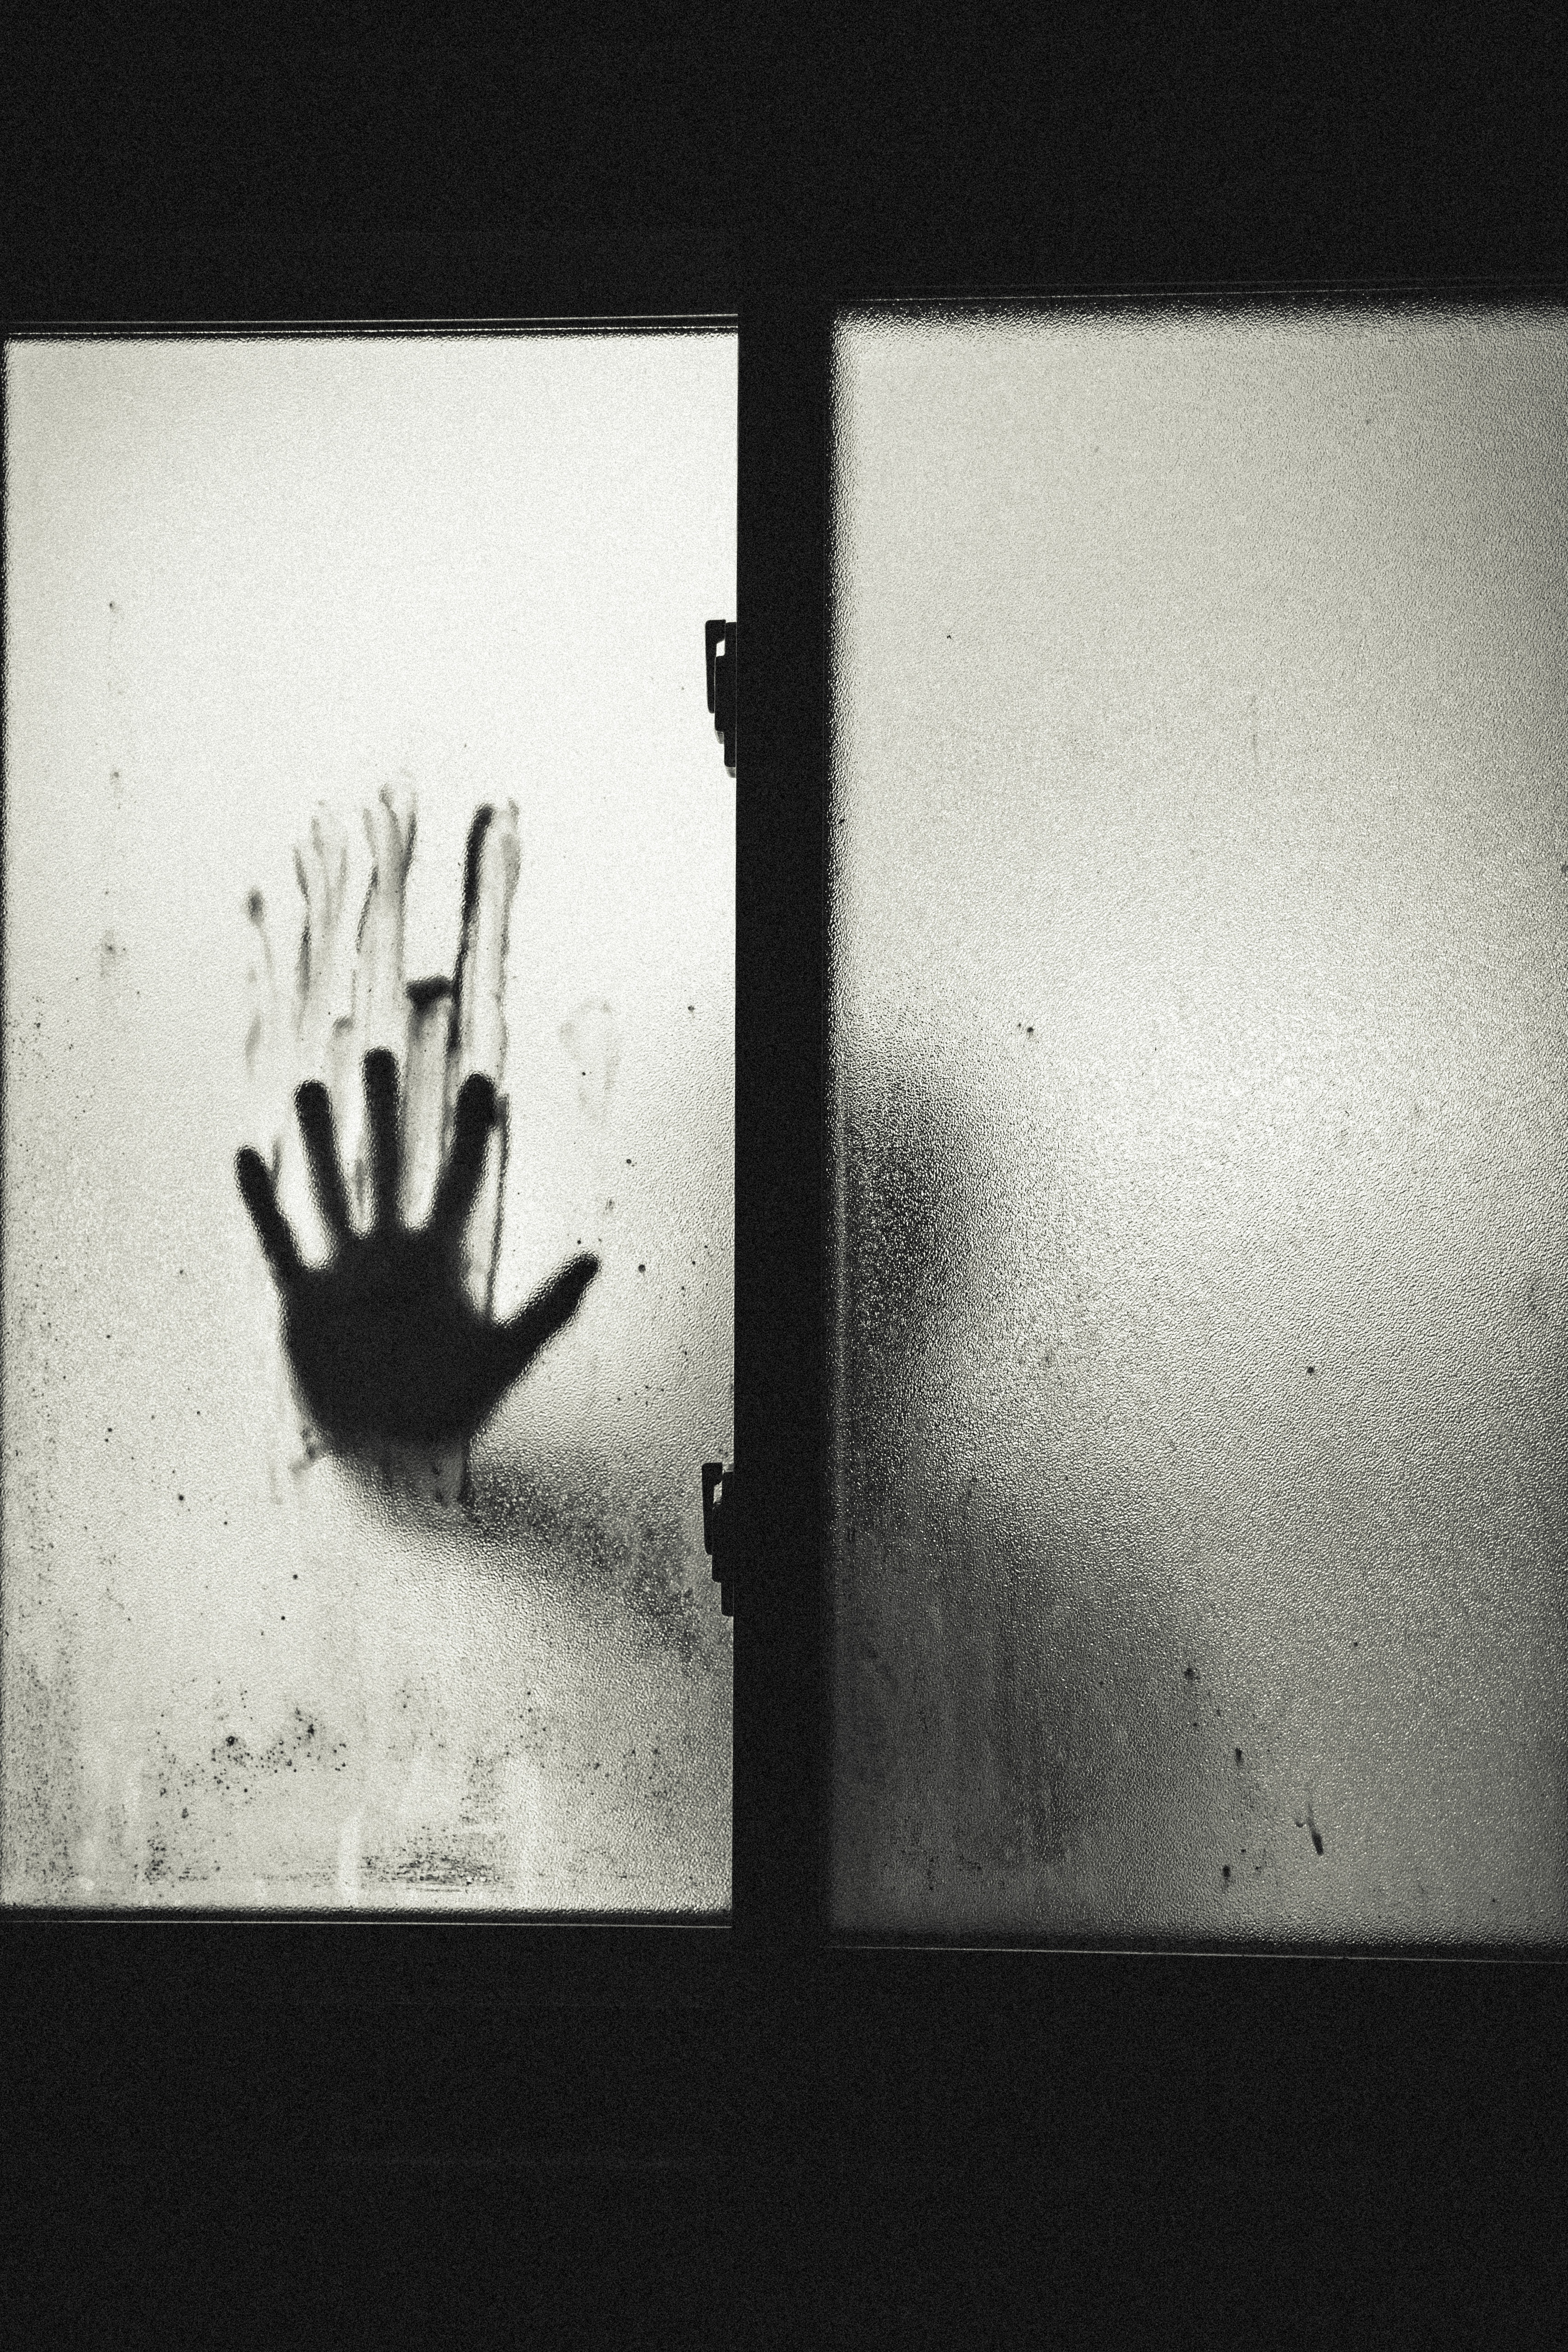 grayscale photo of a person with right stained hand on glass window